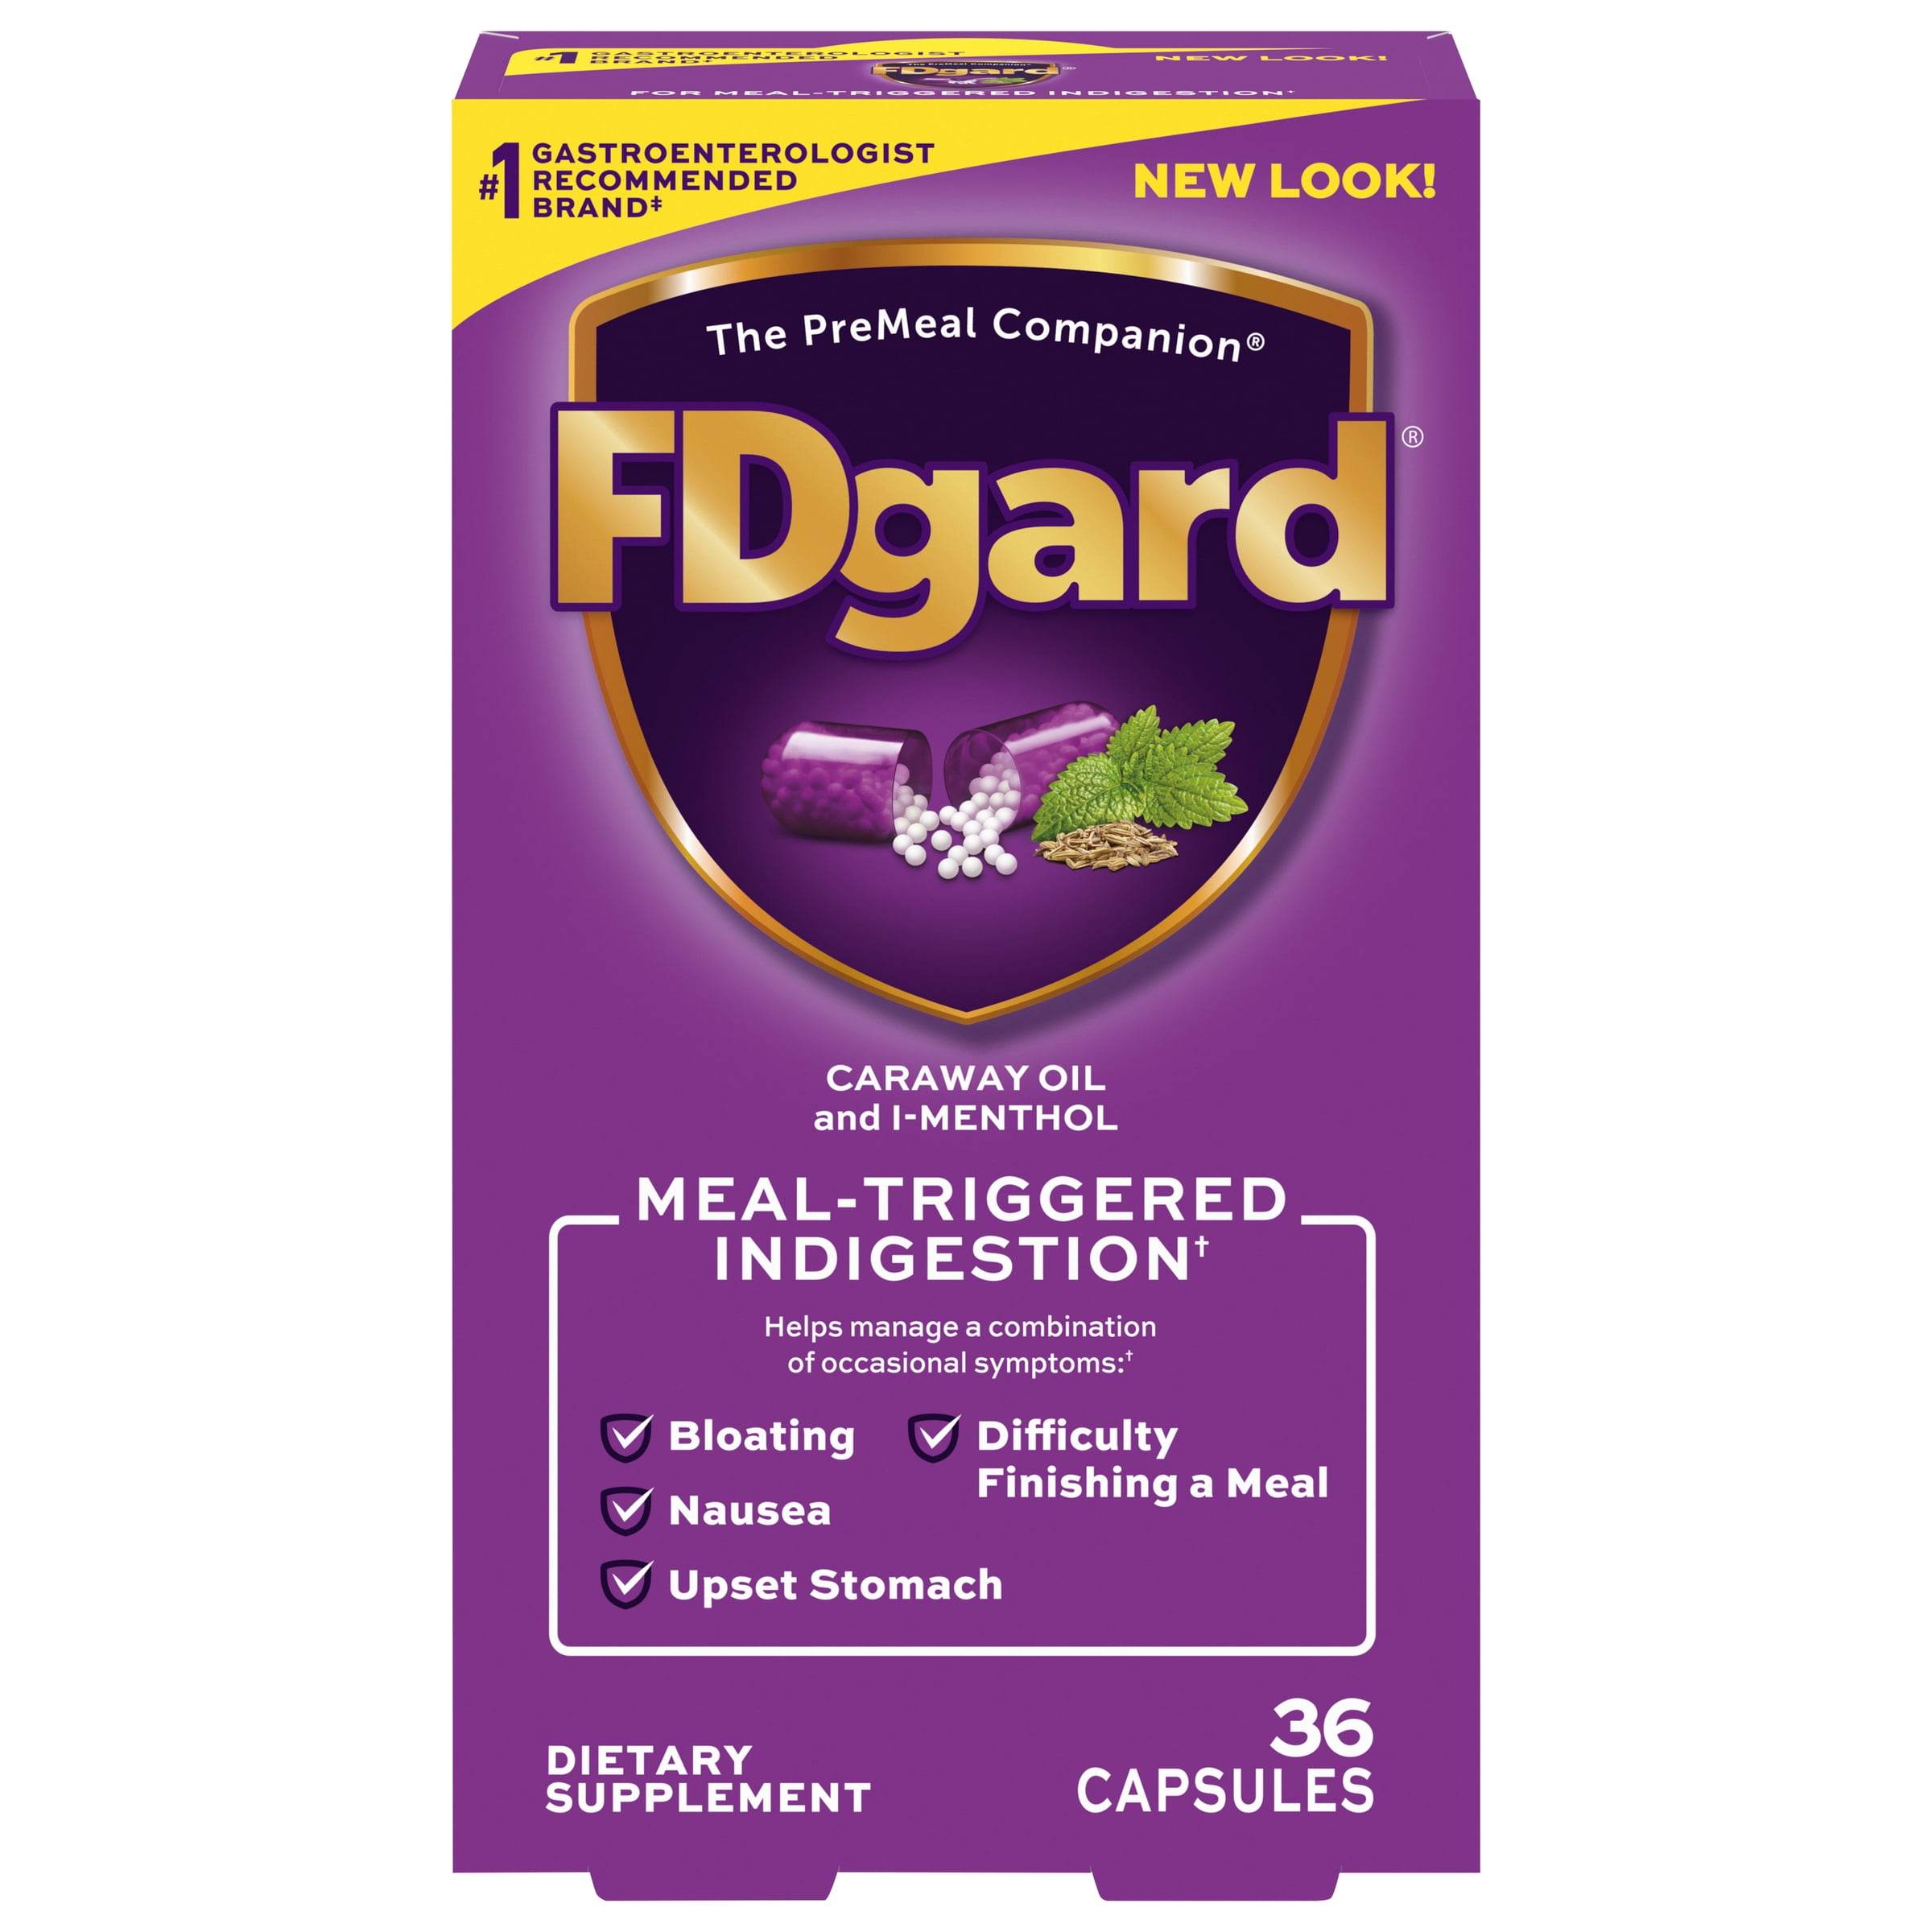 FDgard Dietary Supplement to Help Manage Meal-Triggered Indigestion, 36 Capsules